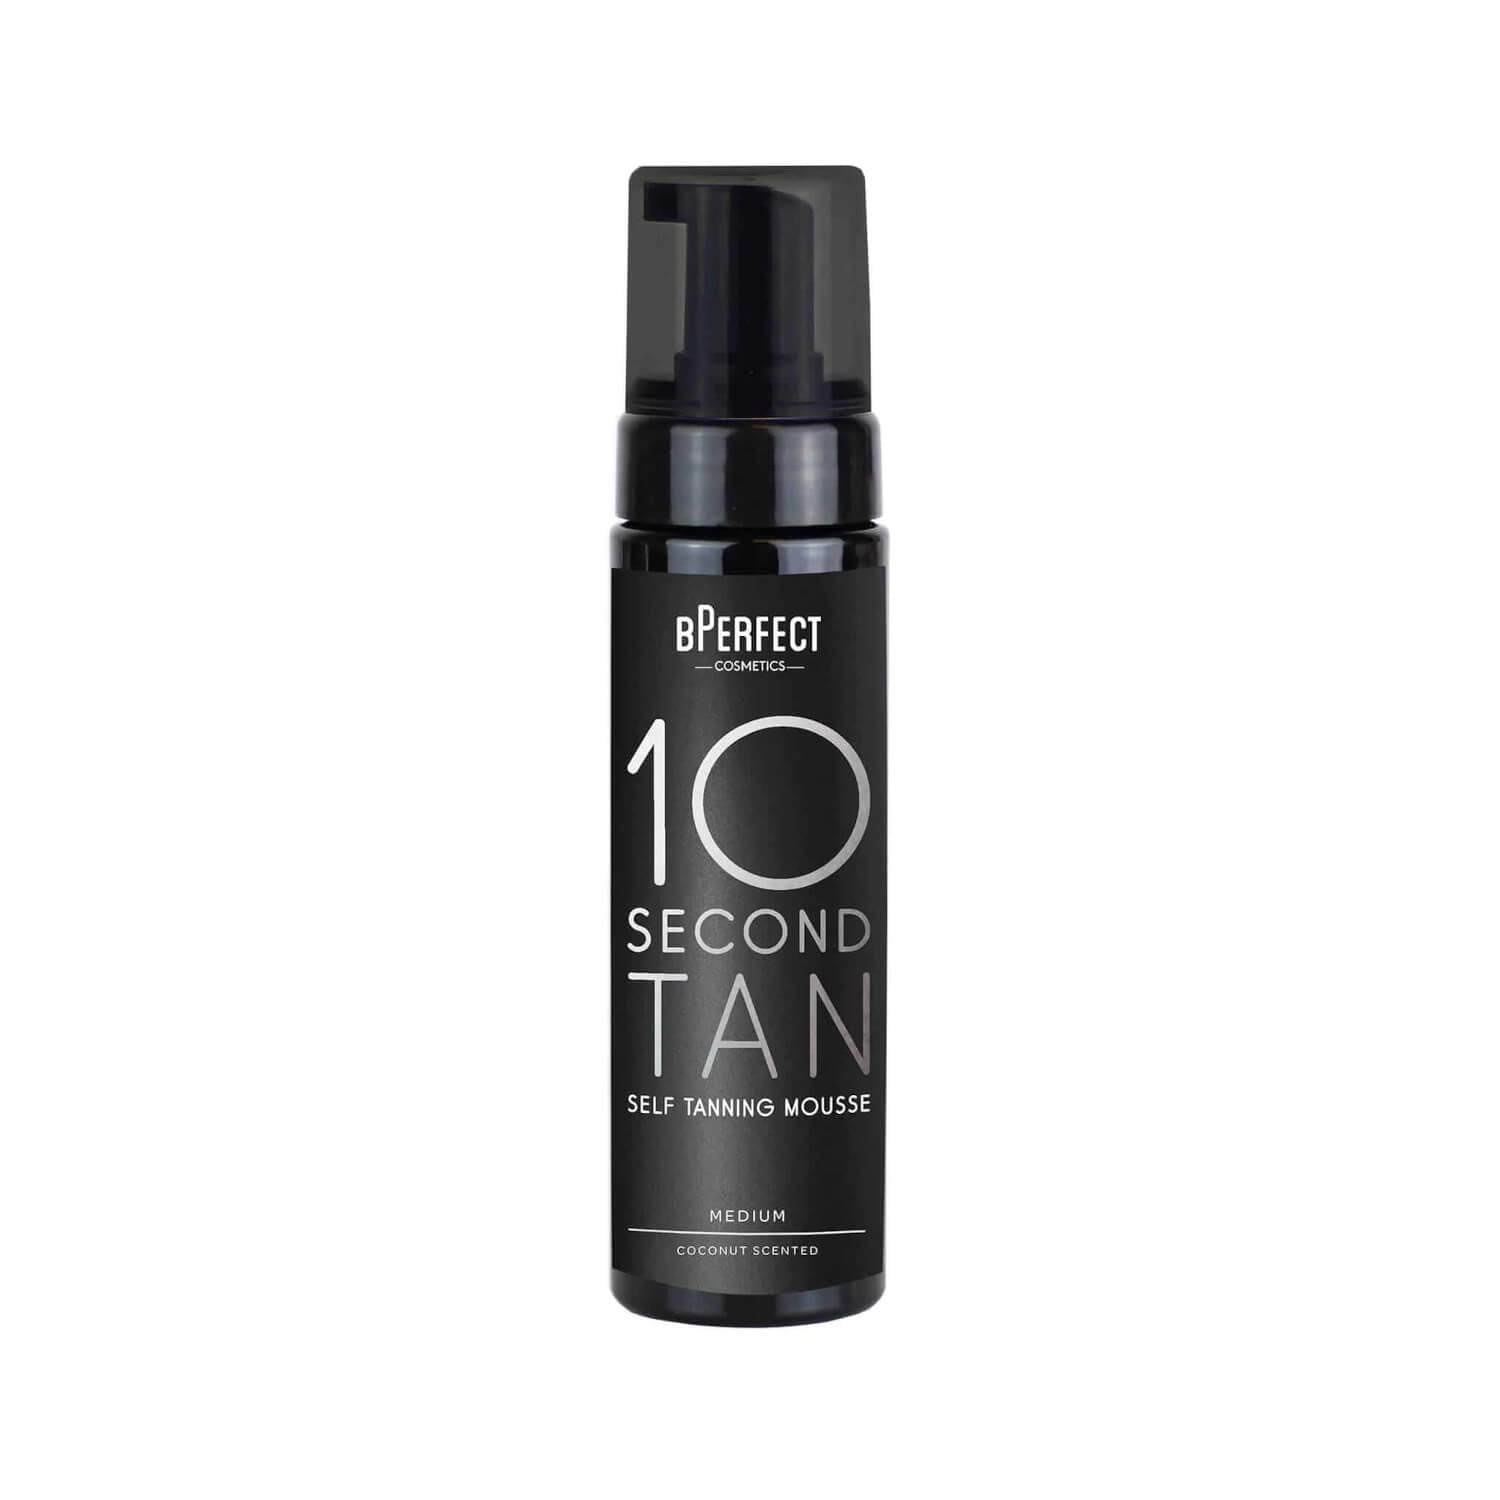 bPerfect 10 Second Tan Self Tanning Mousse